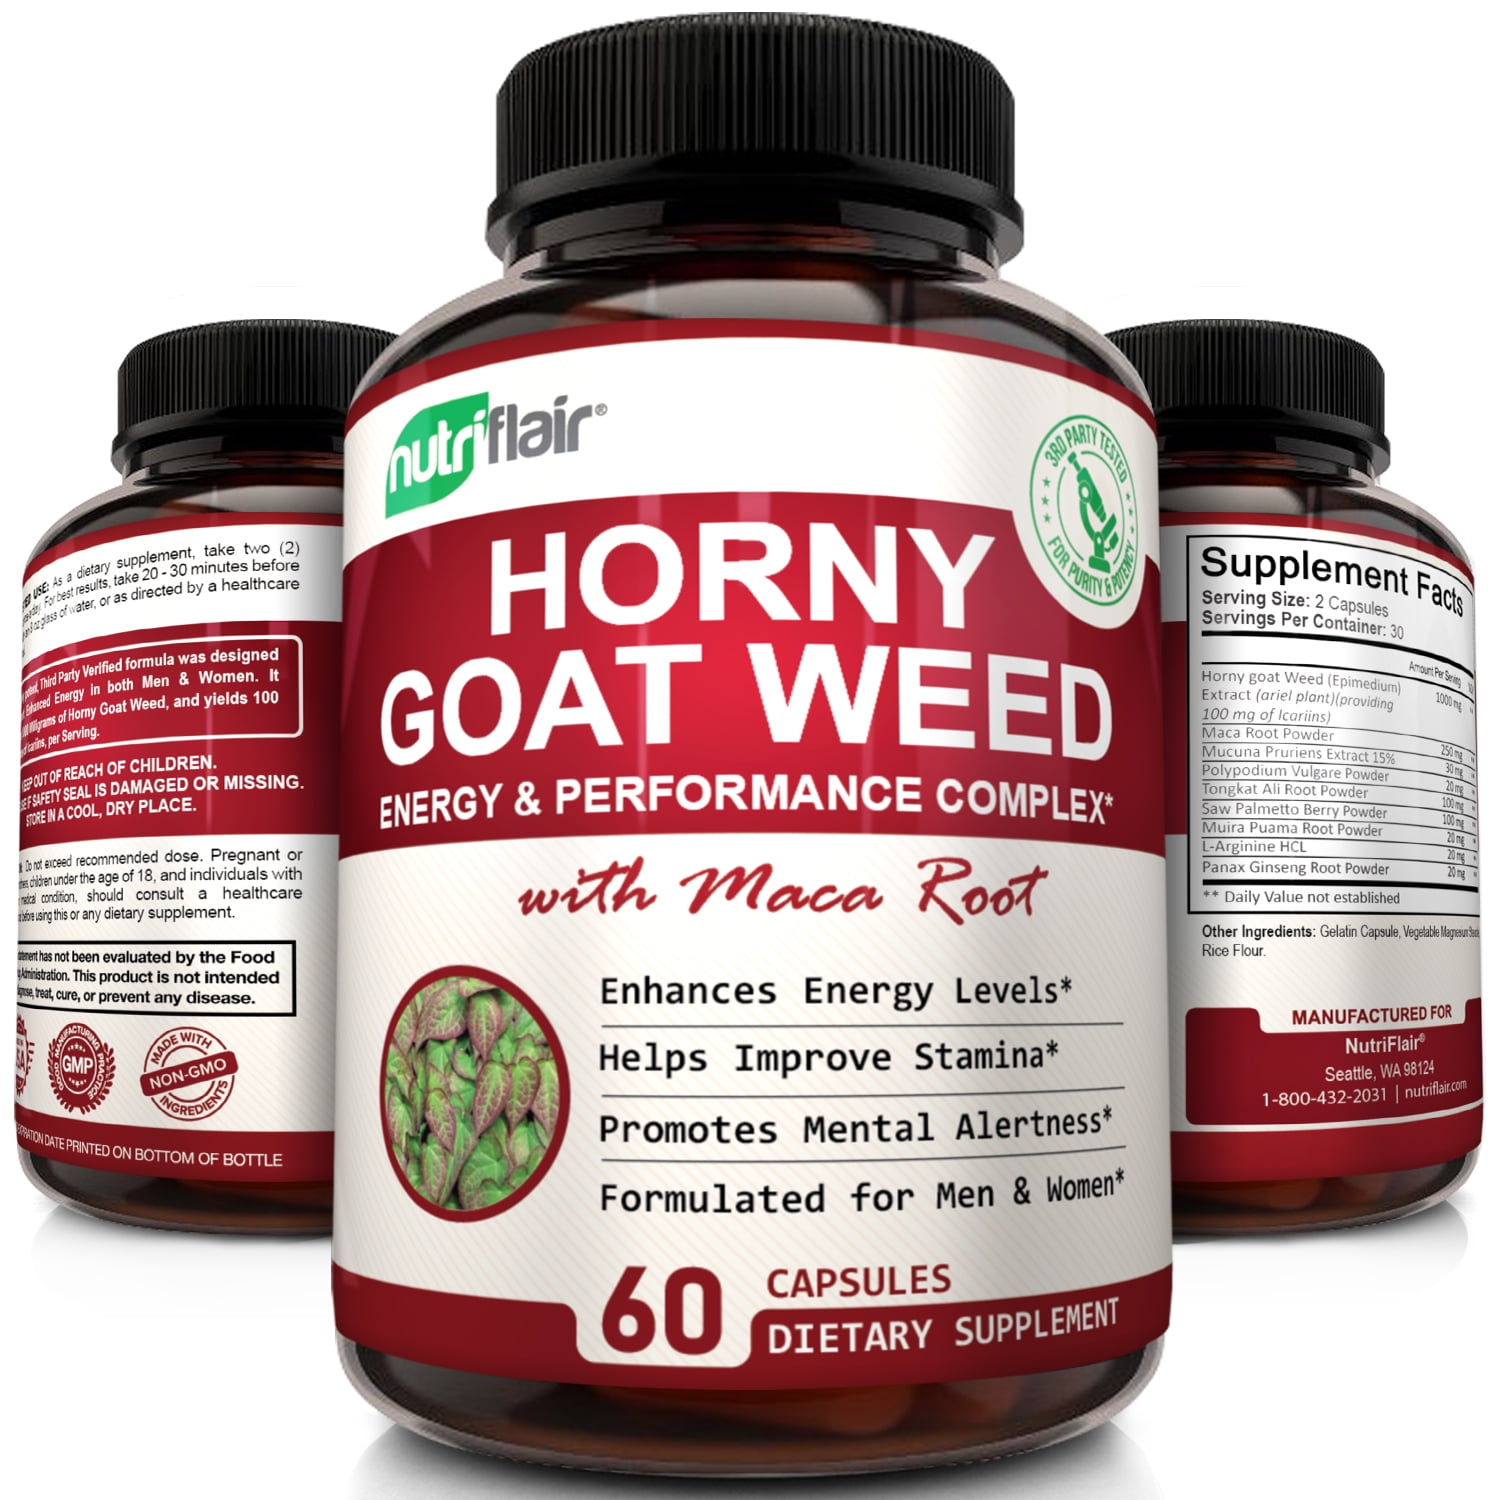 Kelp 1000mg. Maca root extract. Horny Coat Weed with maca. Swiss horny Goat Weed Ginseng maca Complex. Либидо комплекс